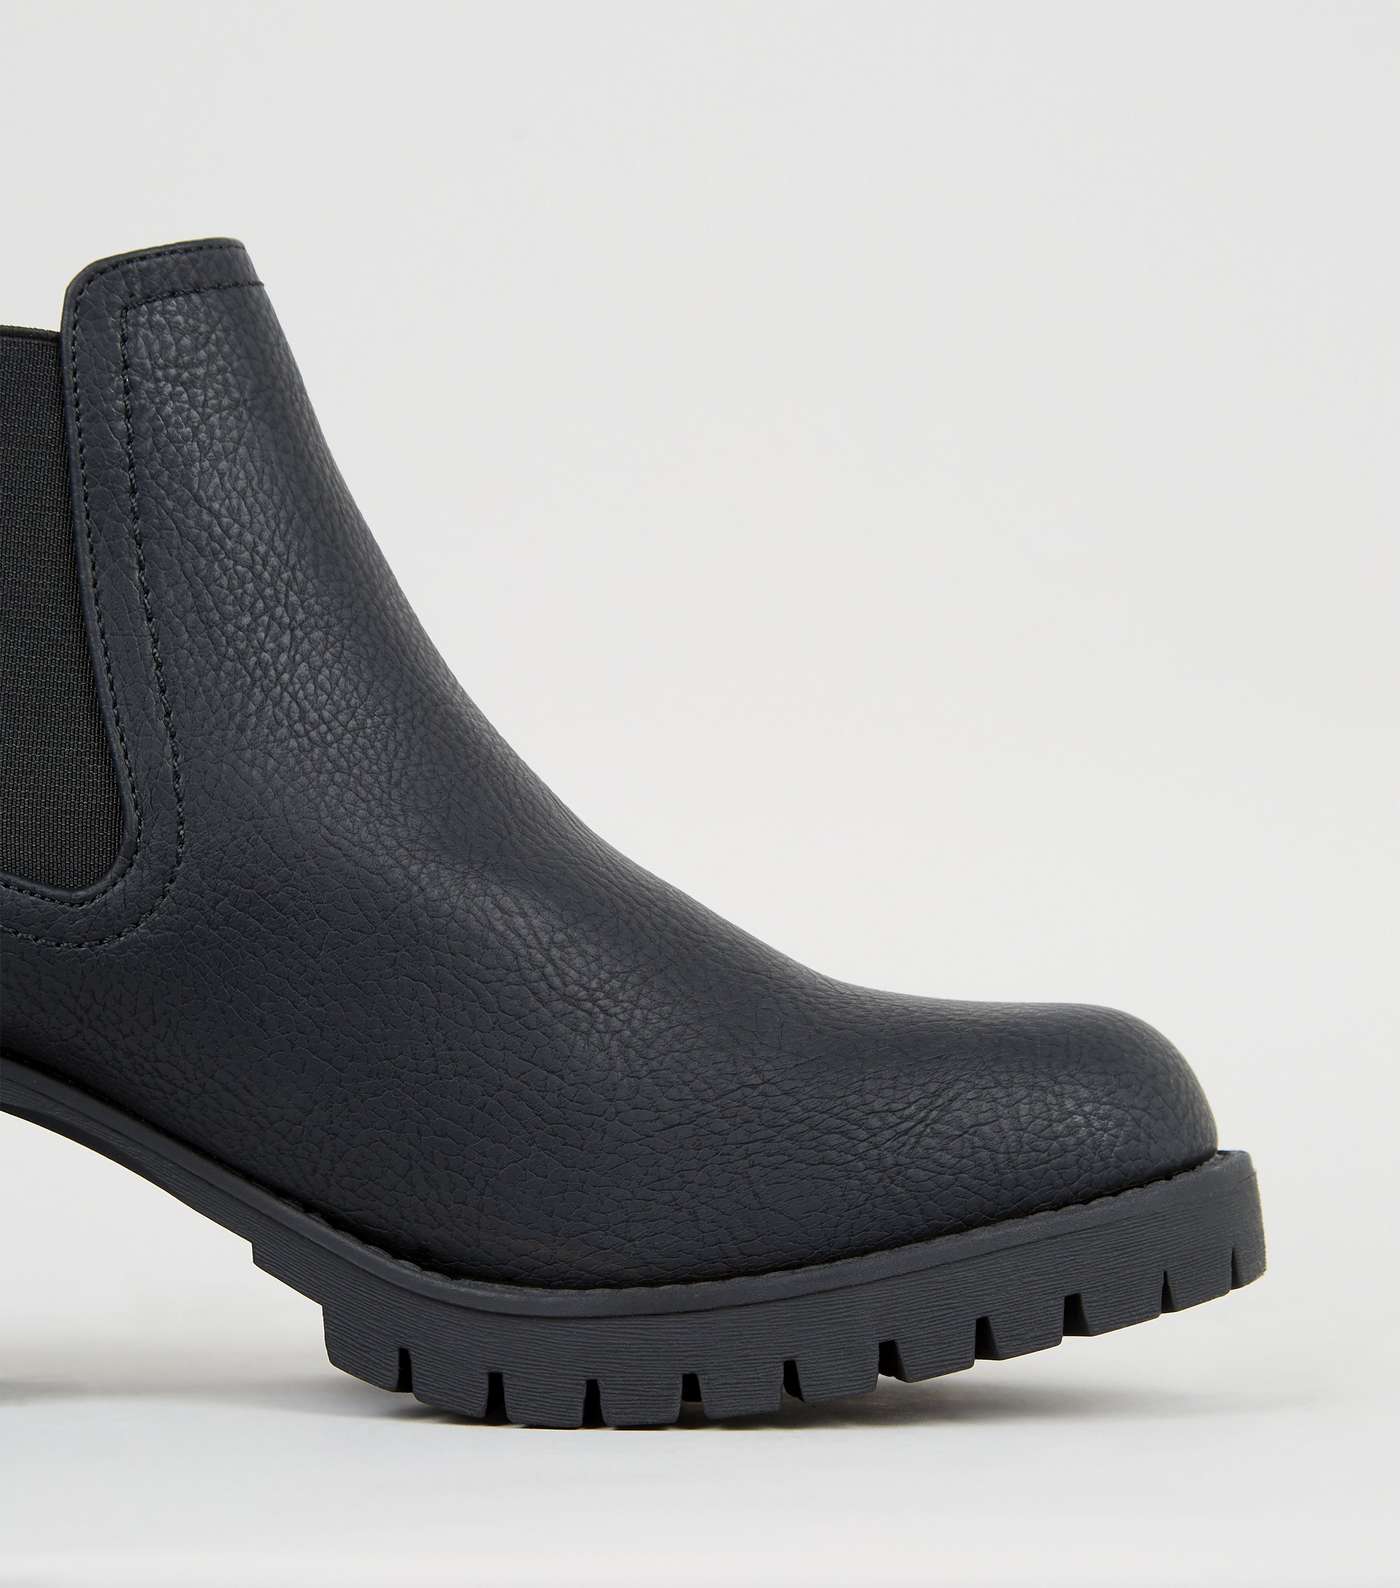 Black Leather-Look Cleated Chelsea Boots Image 3